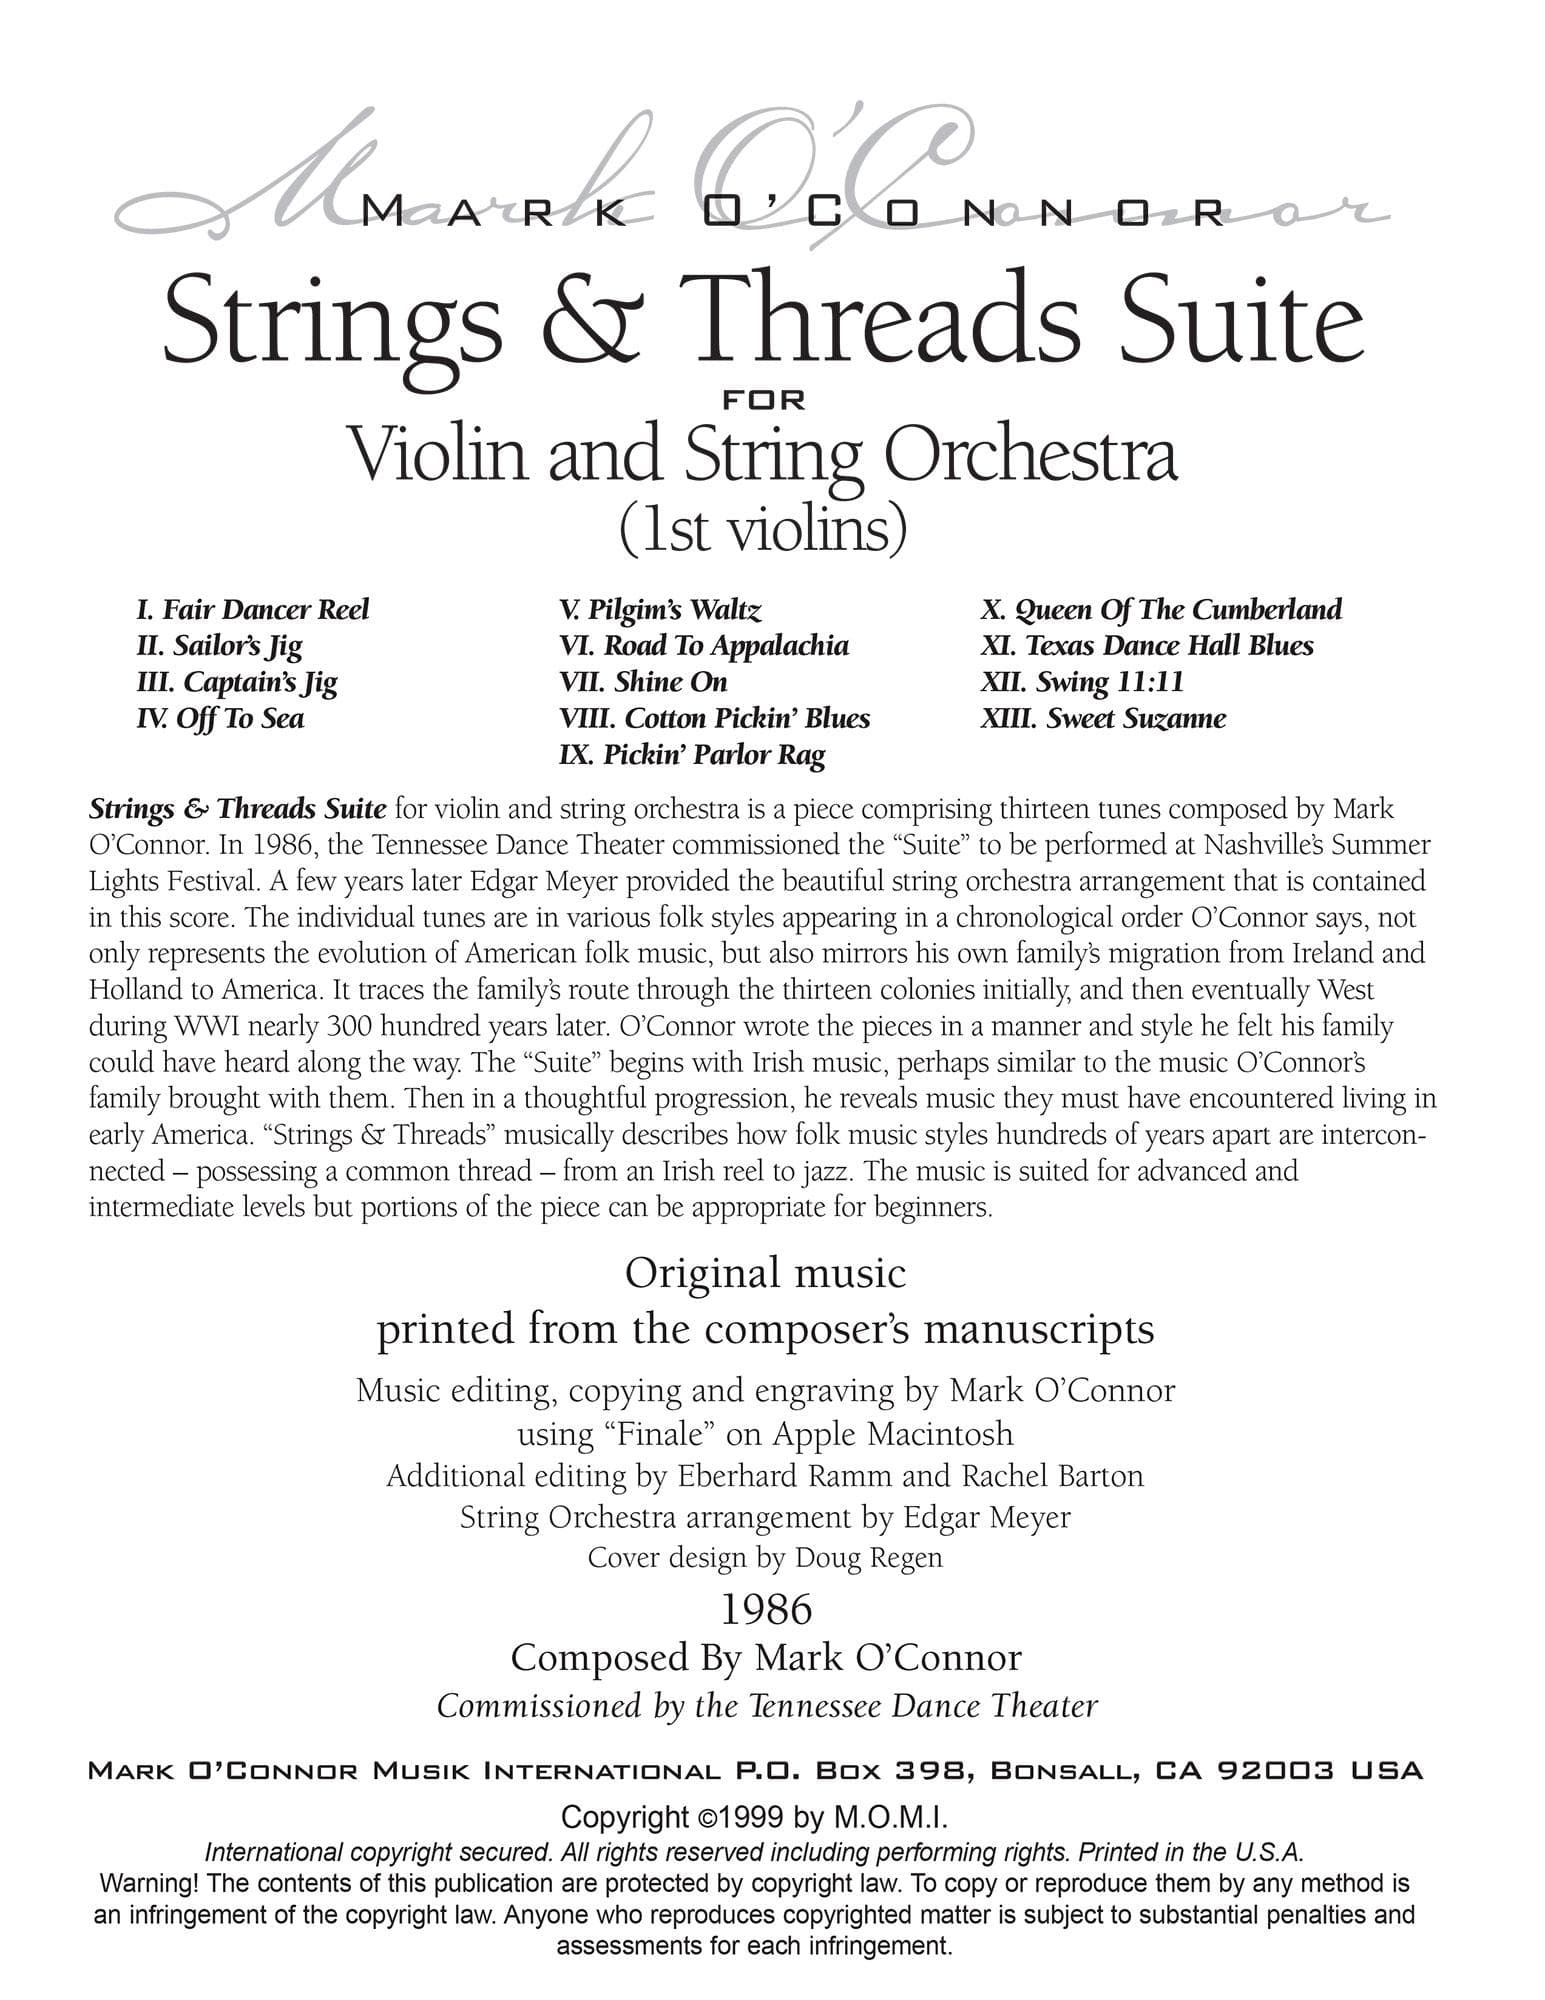 O'Connor, Mark - Strings & Threads Suite for Violin and String Orchestra - String Parts - Digital Download